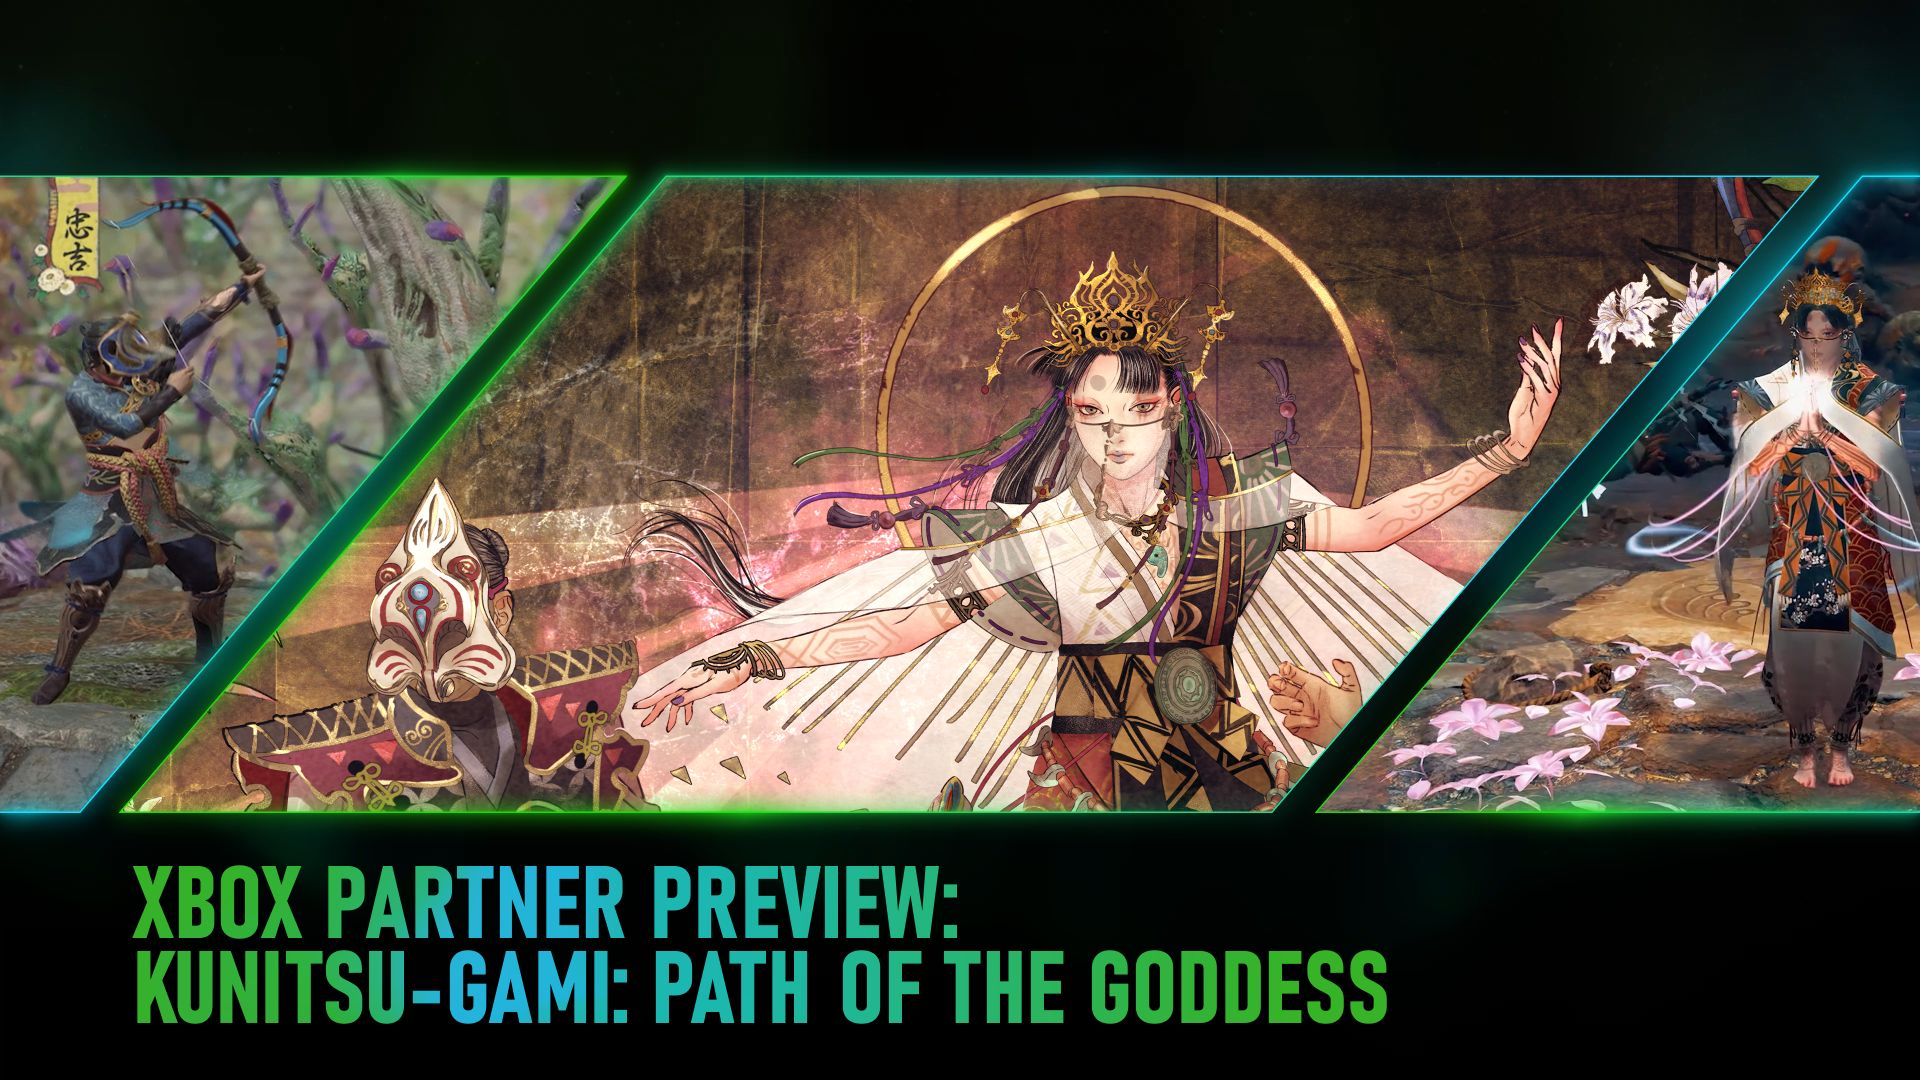 New Game 'Kunitsu-Gami: Path of the Goddess' Joins Xbox Game Pass Soon